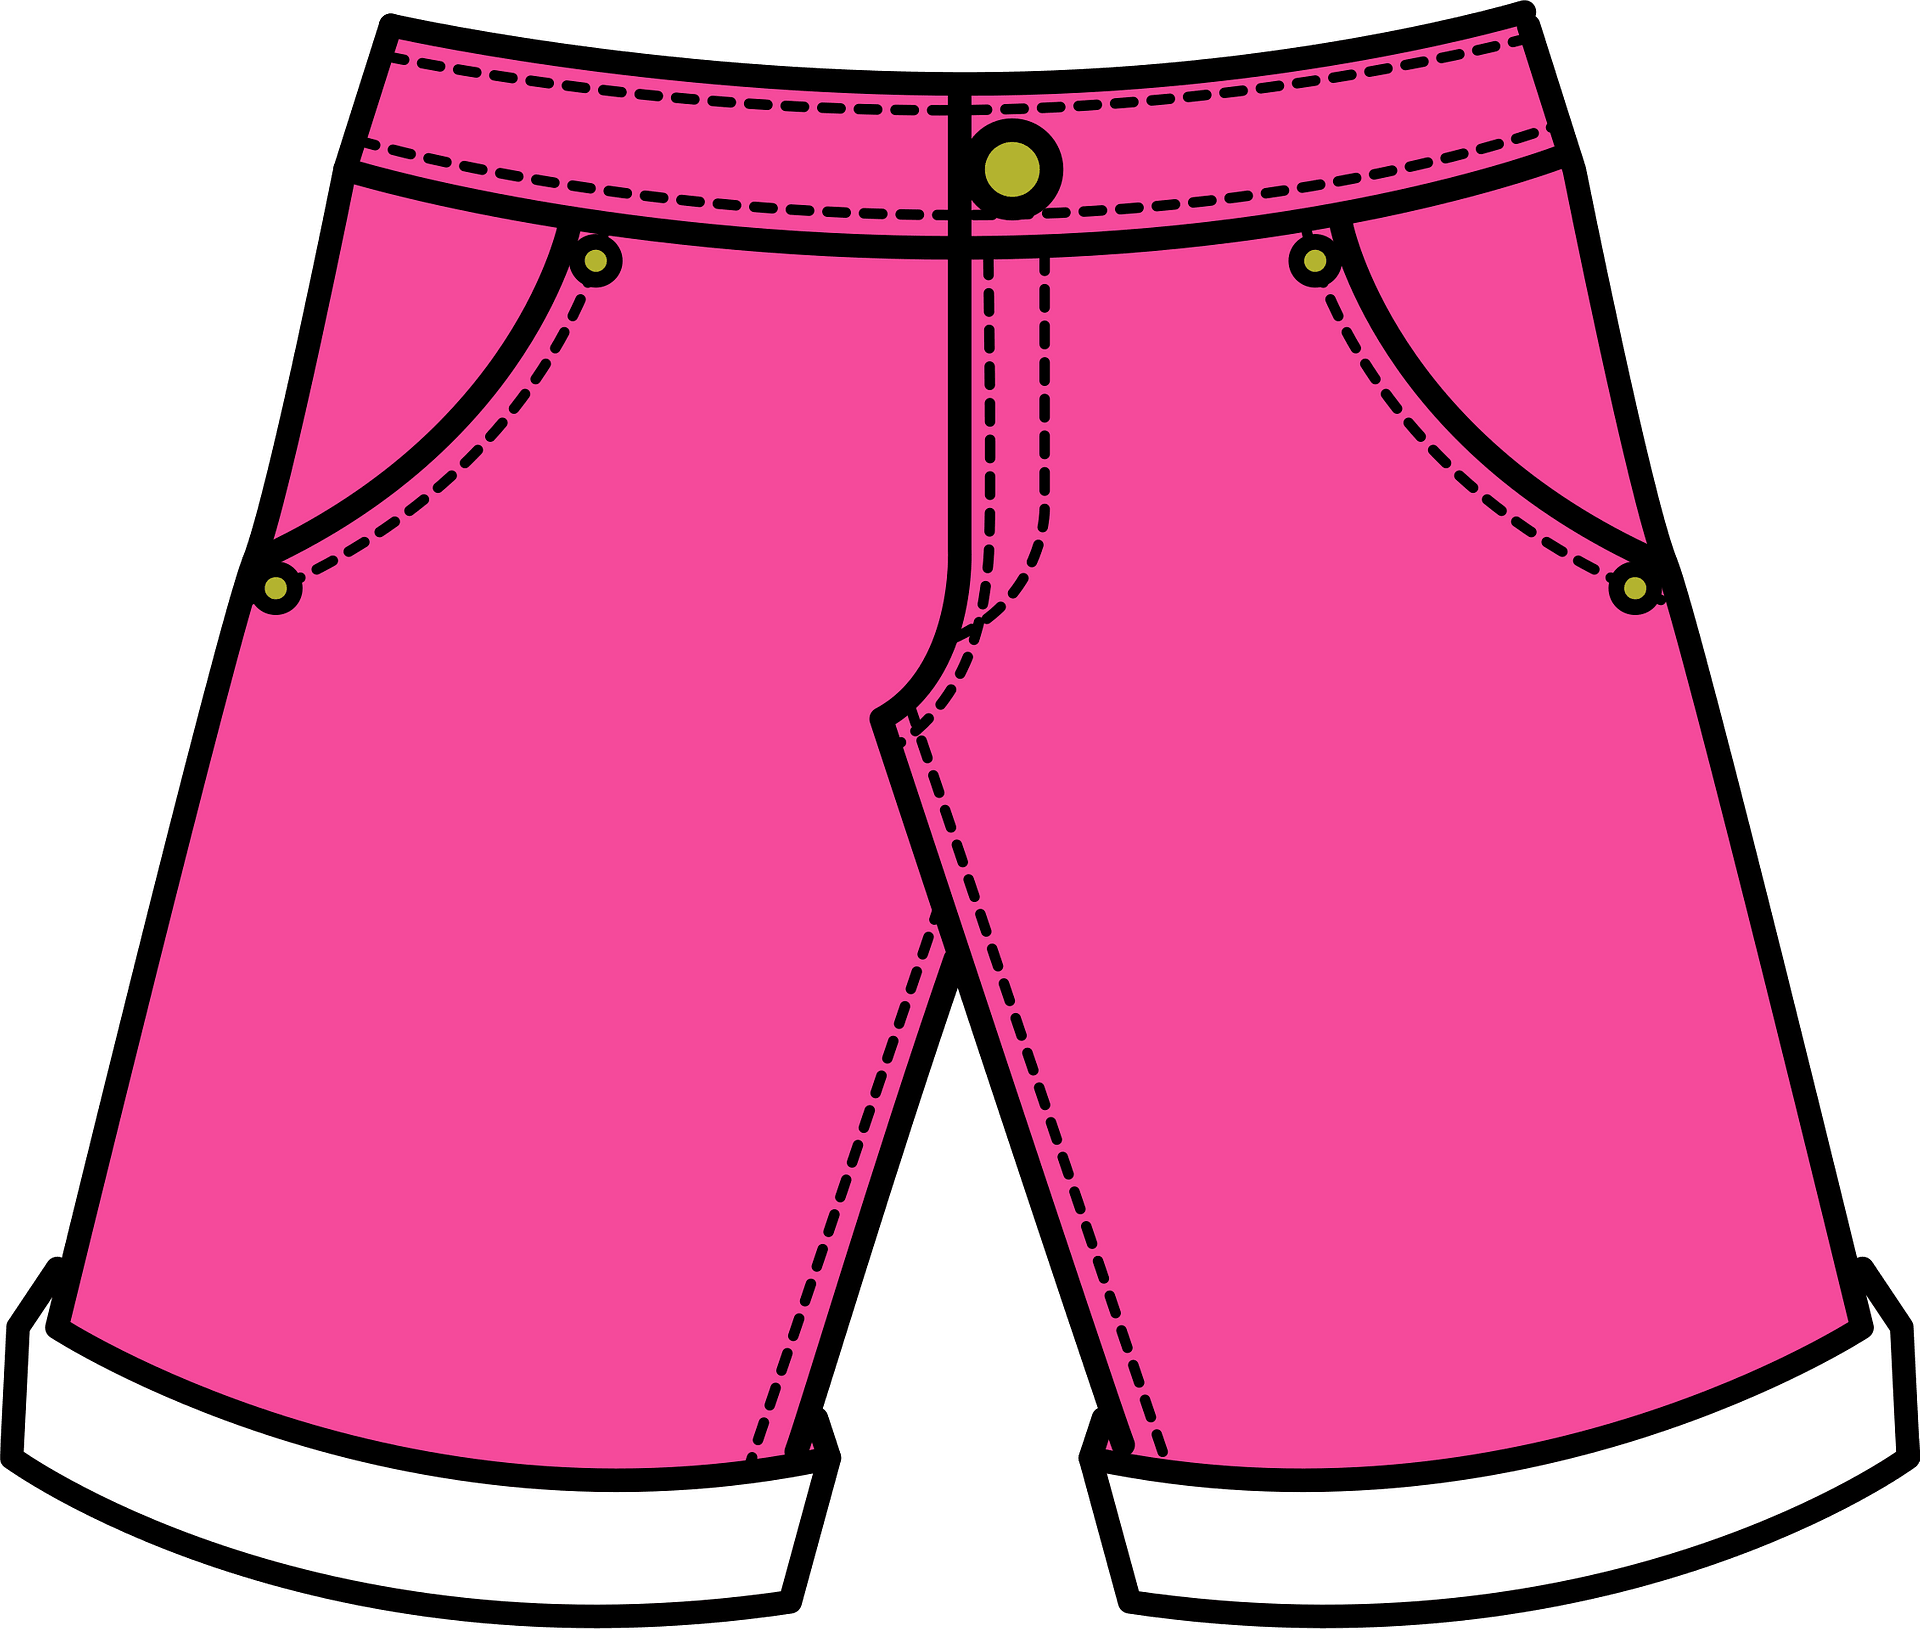 Free shorts clipart, Download Free shorts clipart png images, Free ...